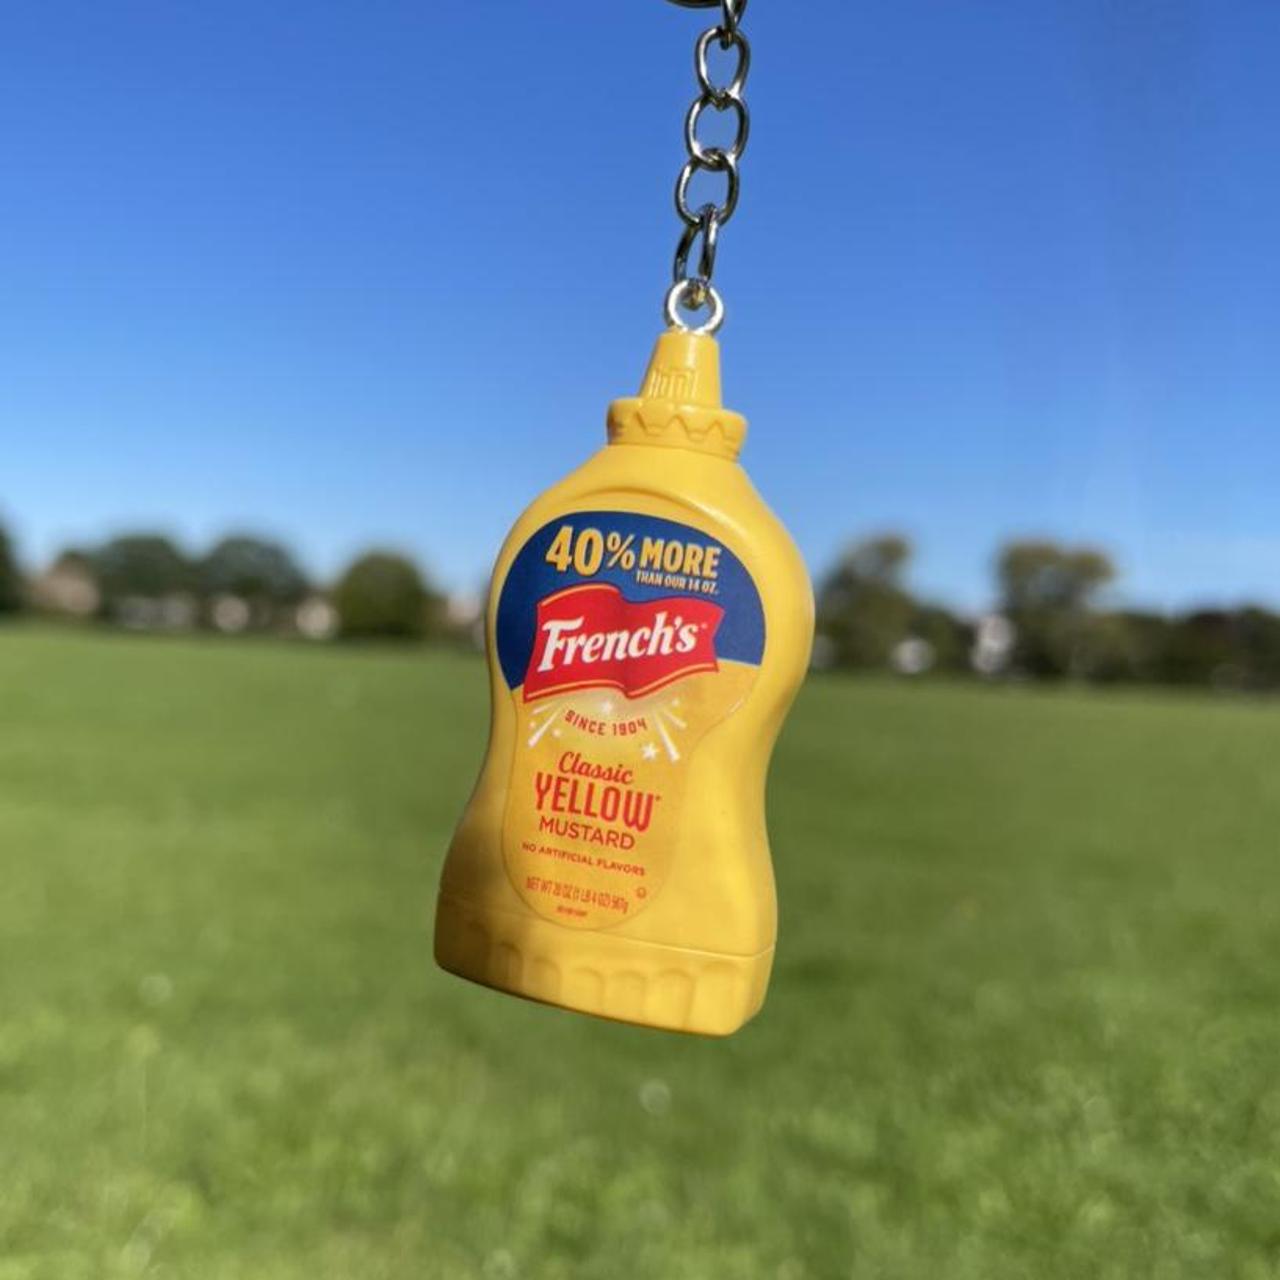 Product Image 2 - Calling all mustard lovers!! ☀️

French’s